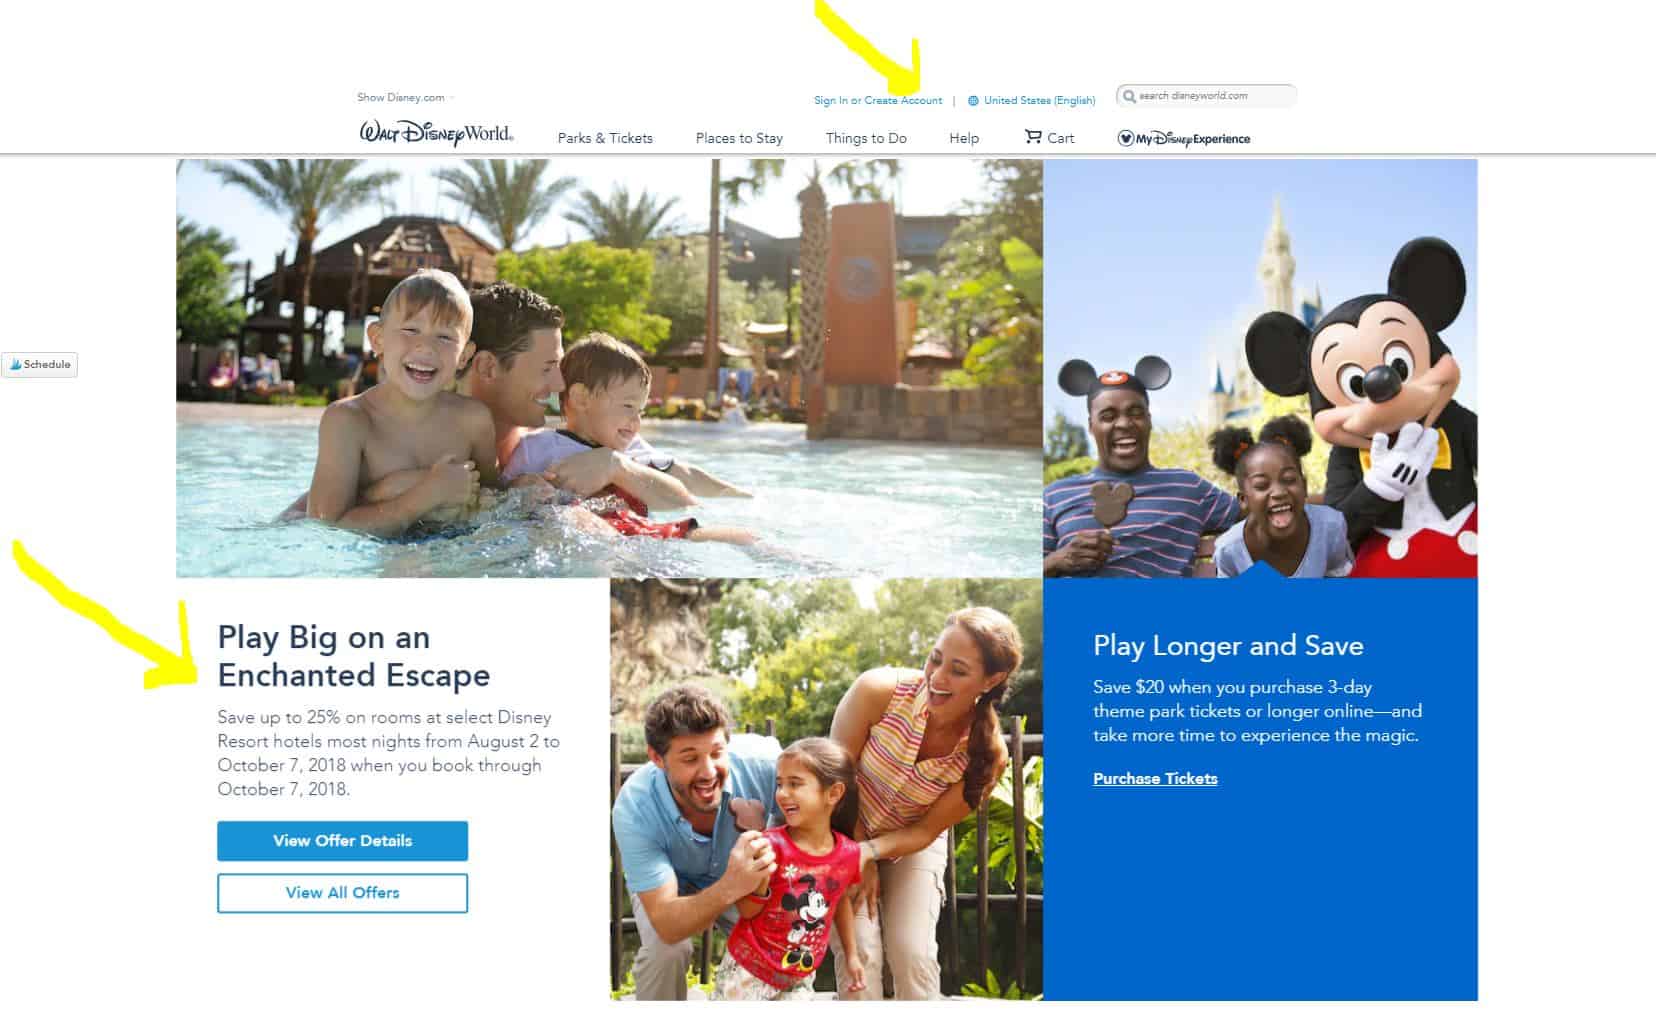 Scroll down the front page of the official WDW website and look for offers. Oh, and create an account while you're there. It may get you on the special offer list.